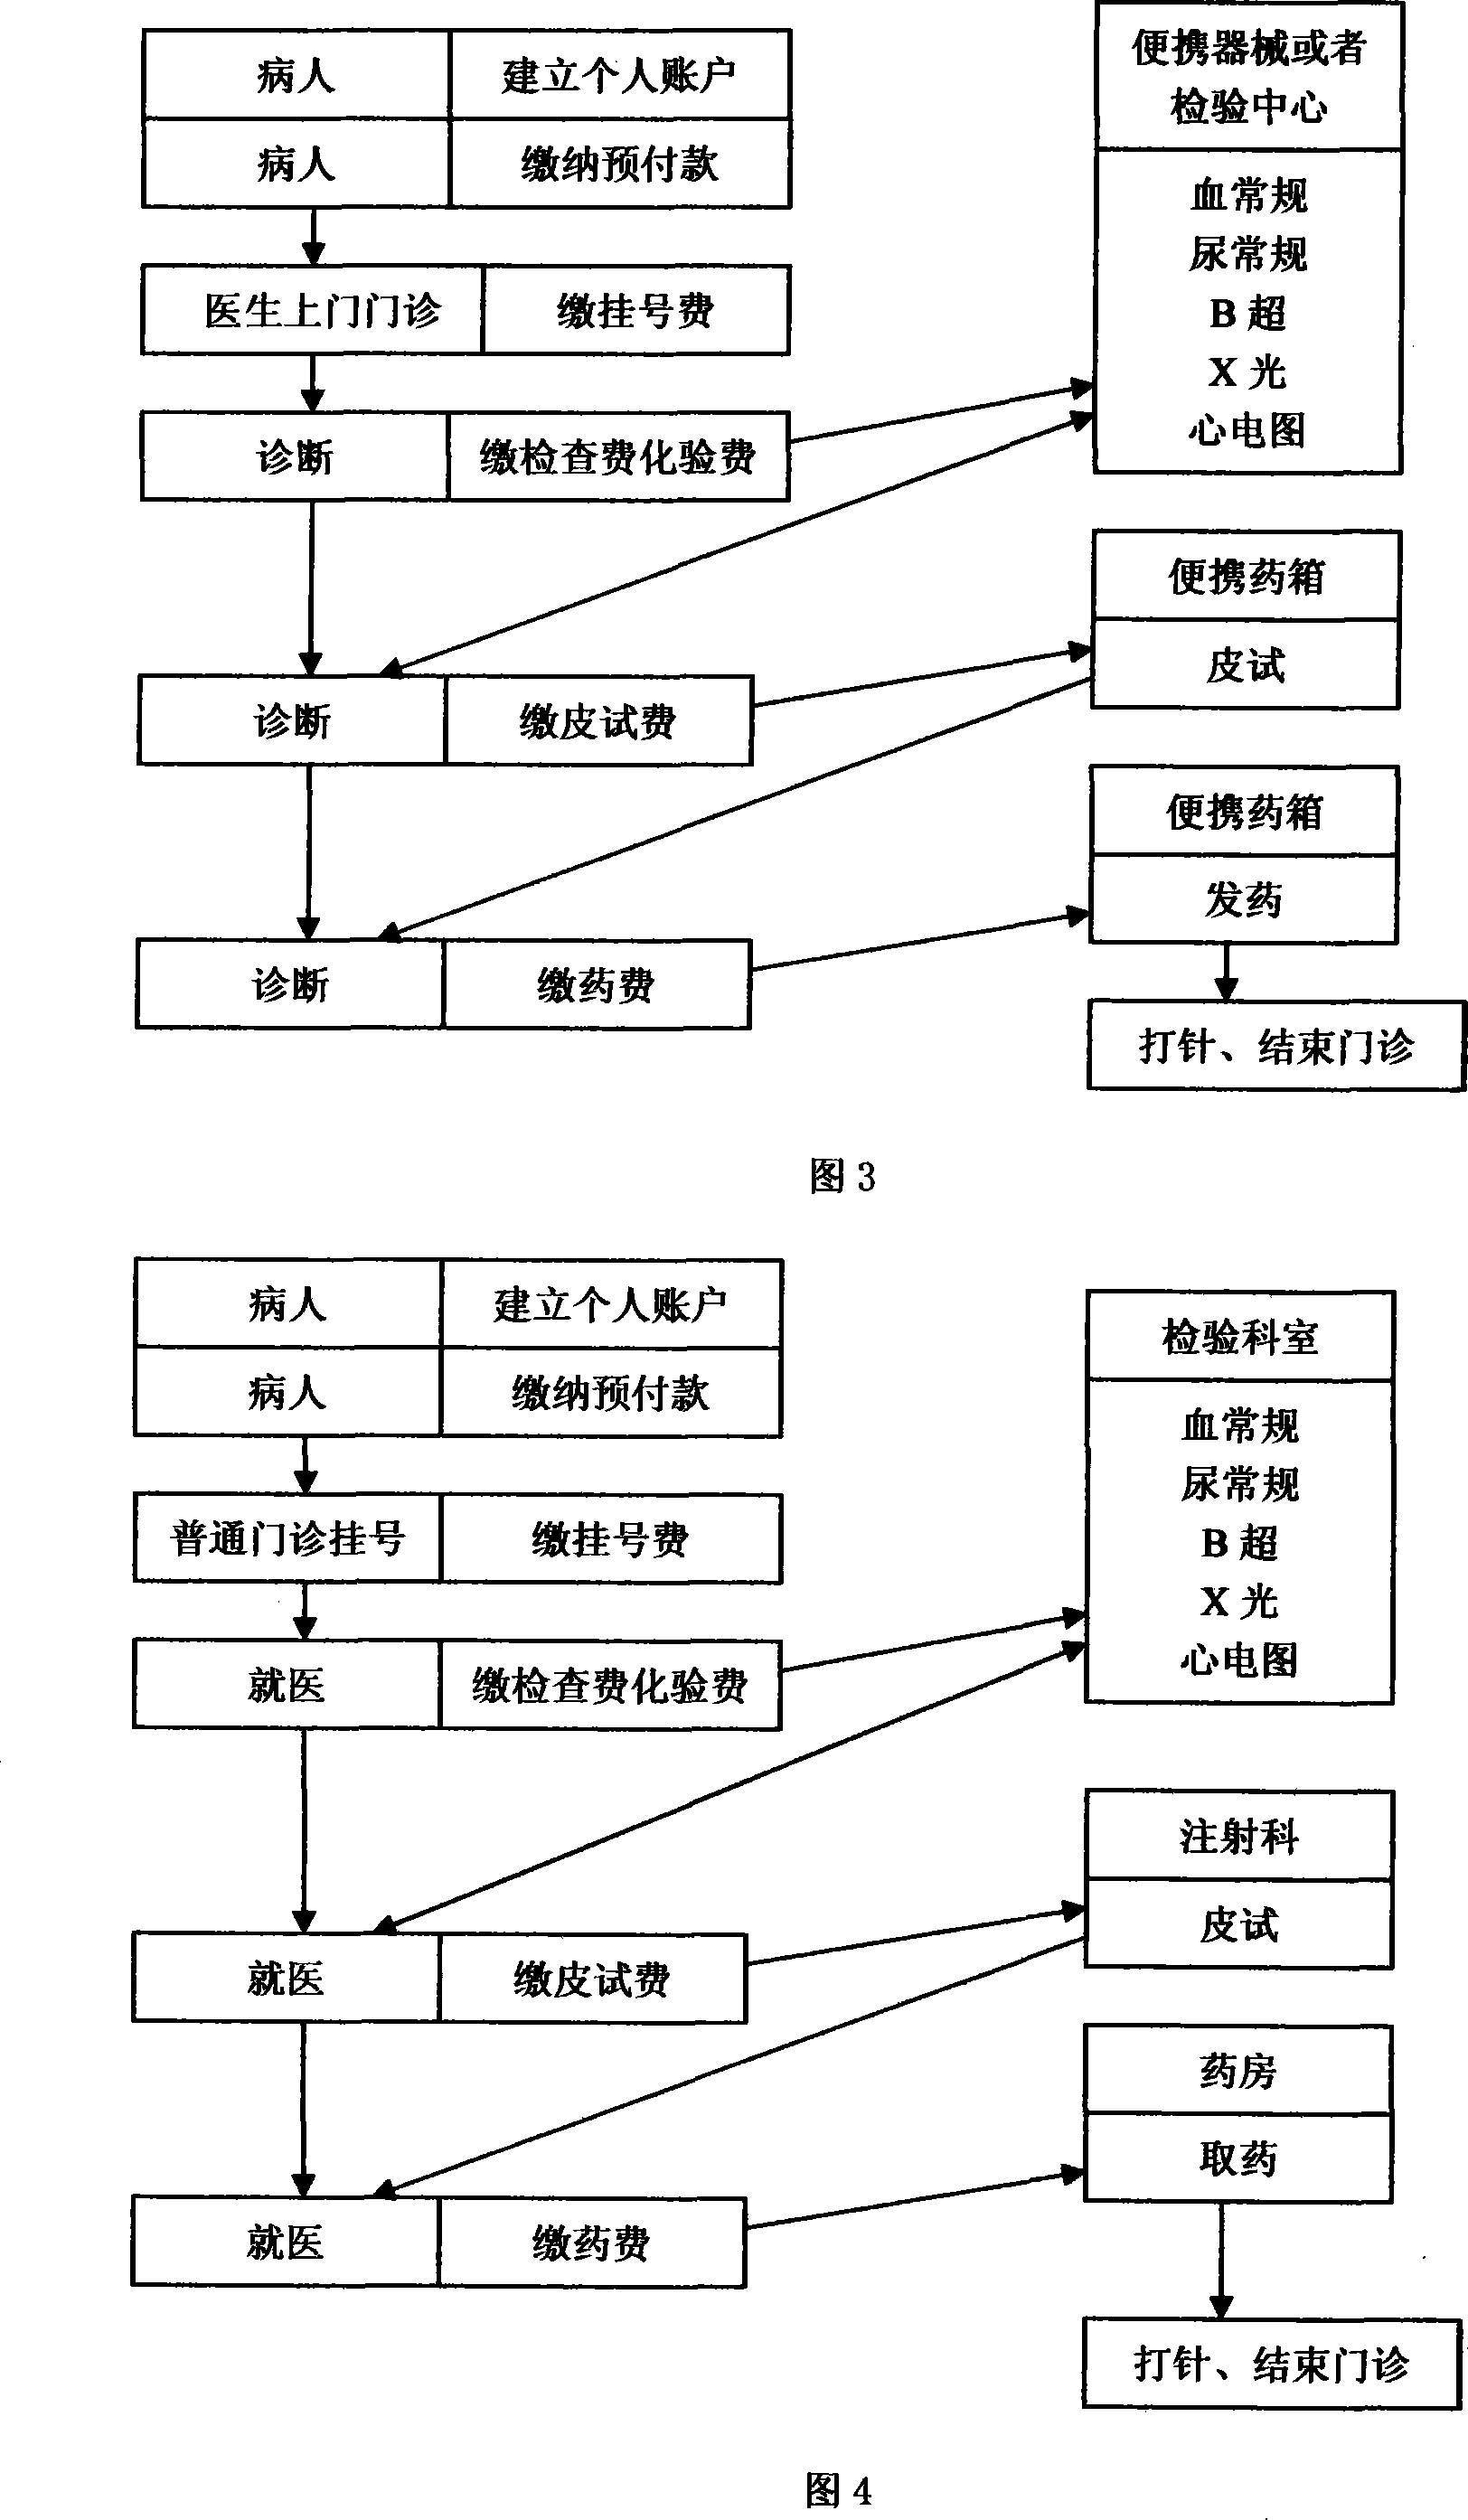 Method for promoting clinic efficiency by network